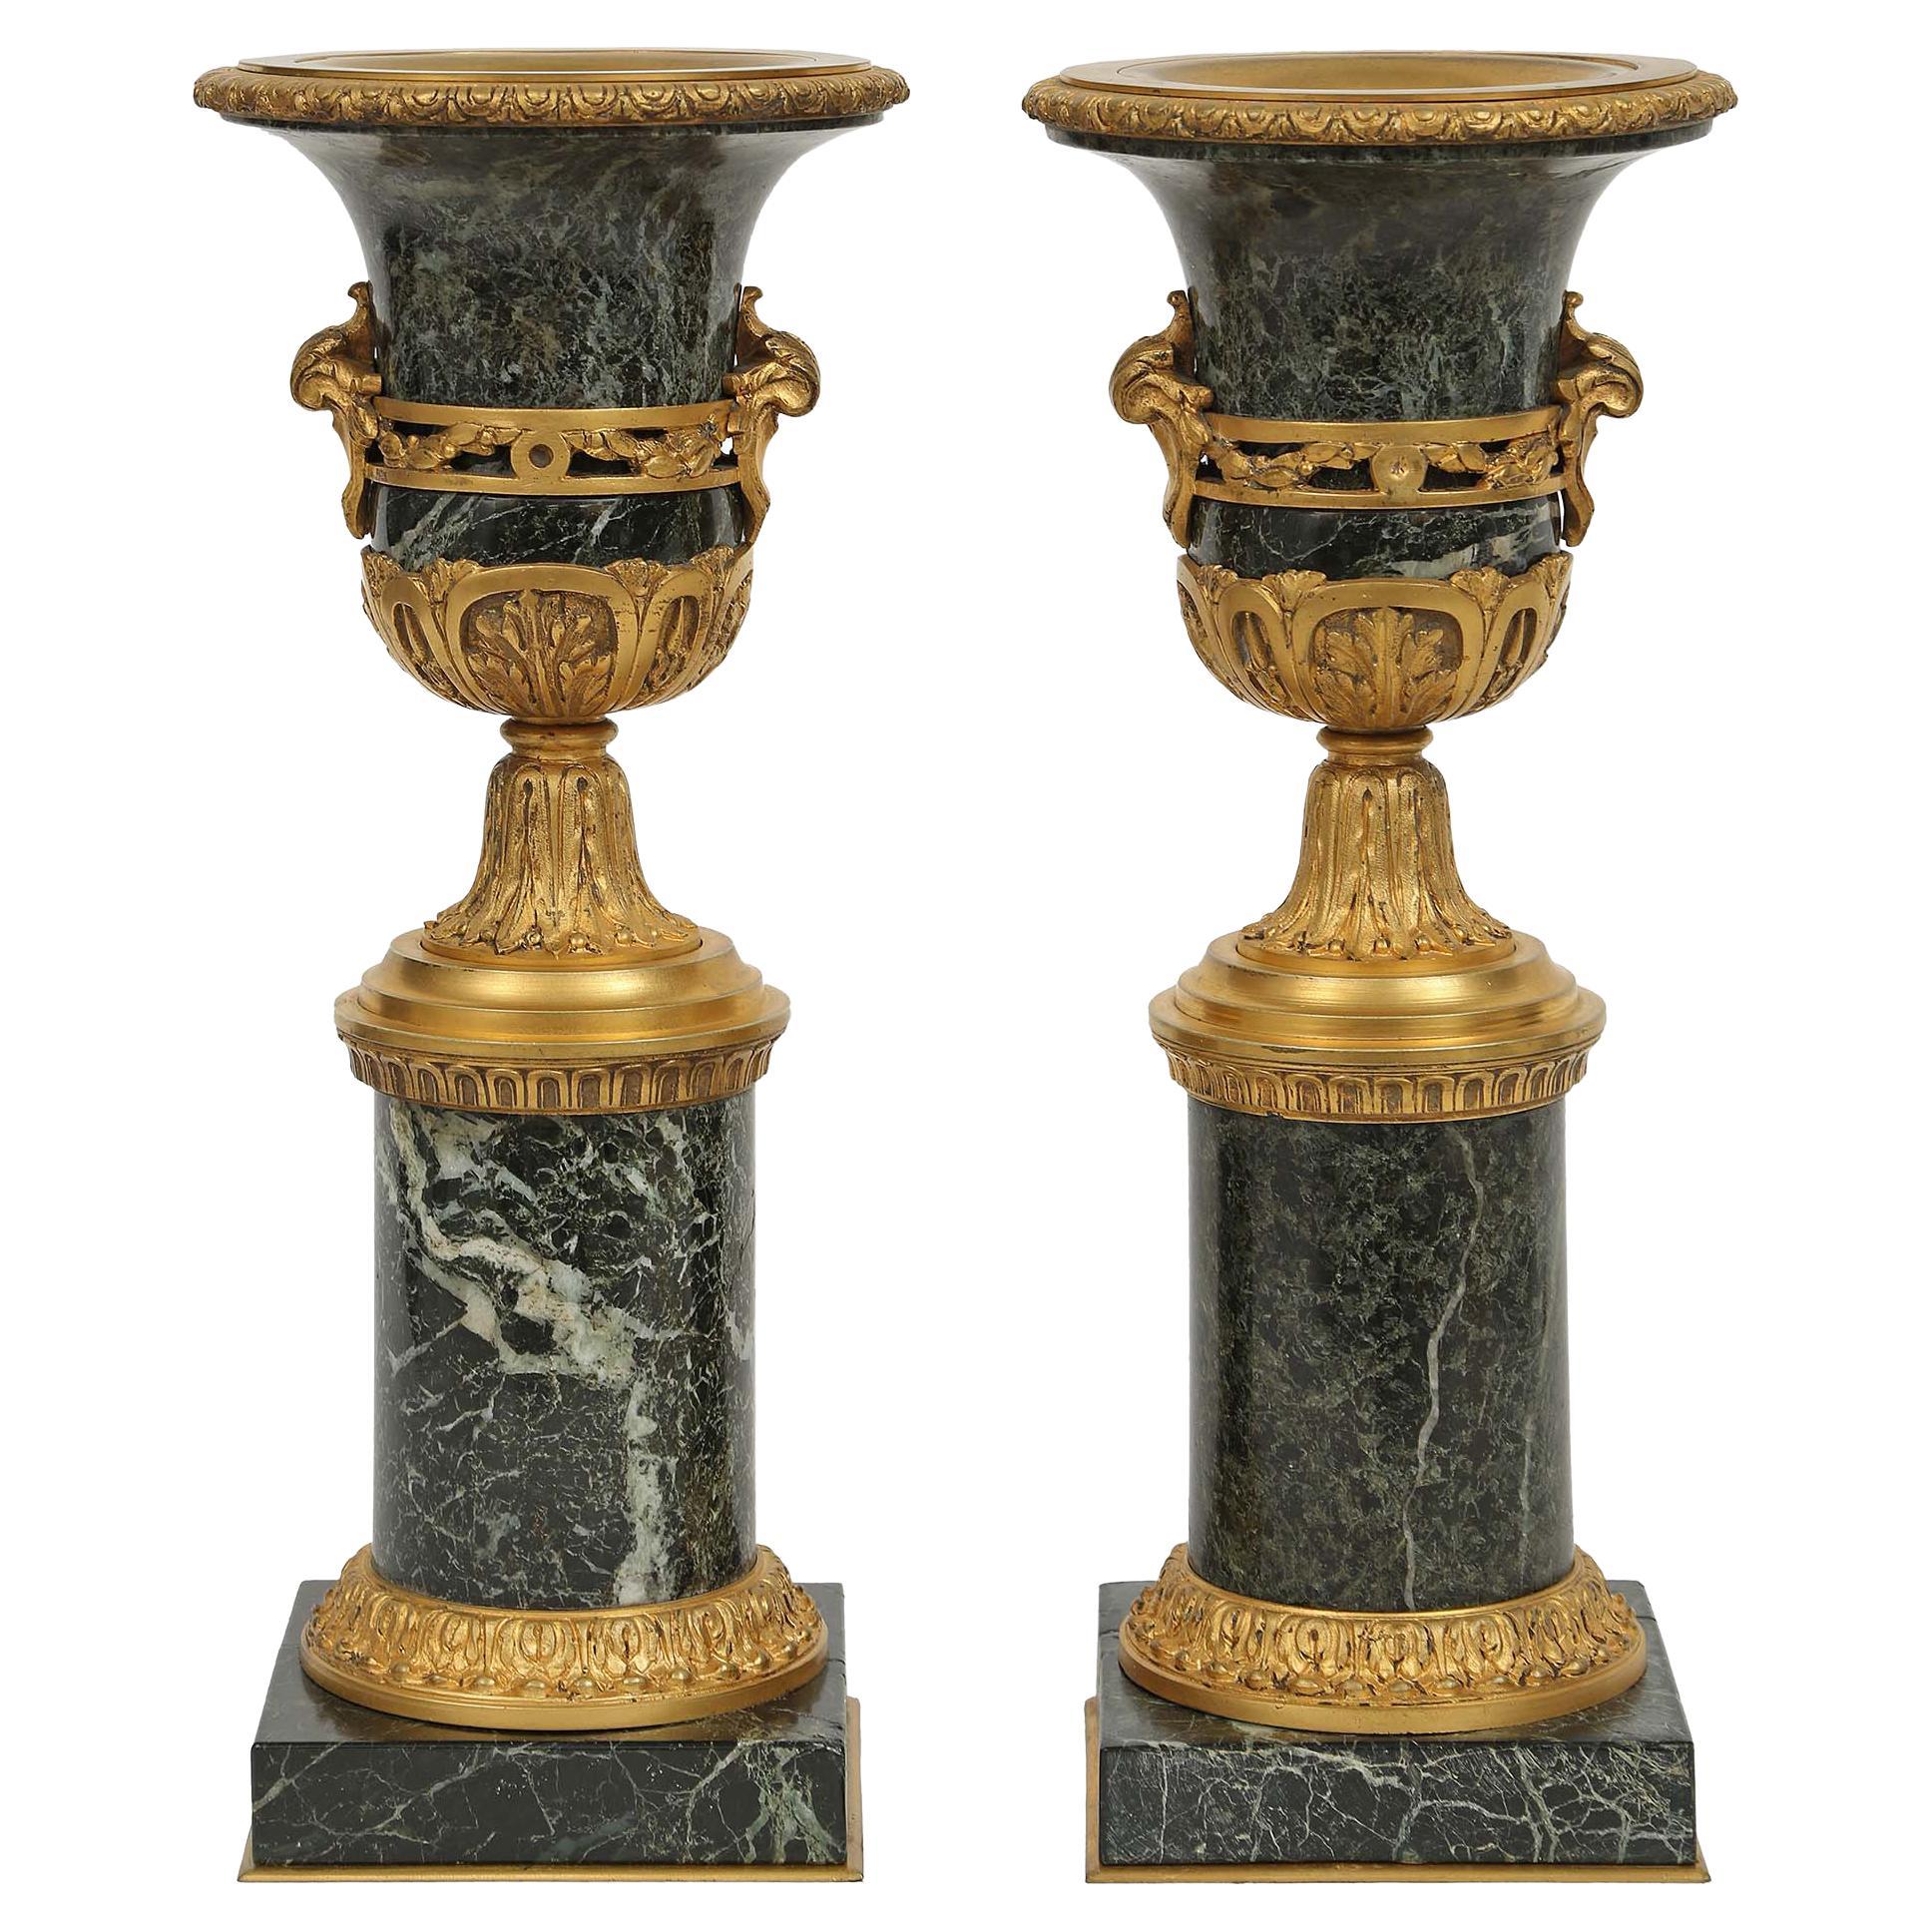 Pair of French Mid-19th Century Louis XVI Style Marble and Ormolu Vases